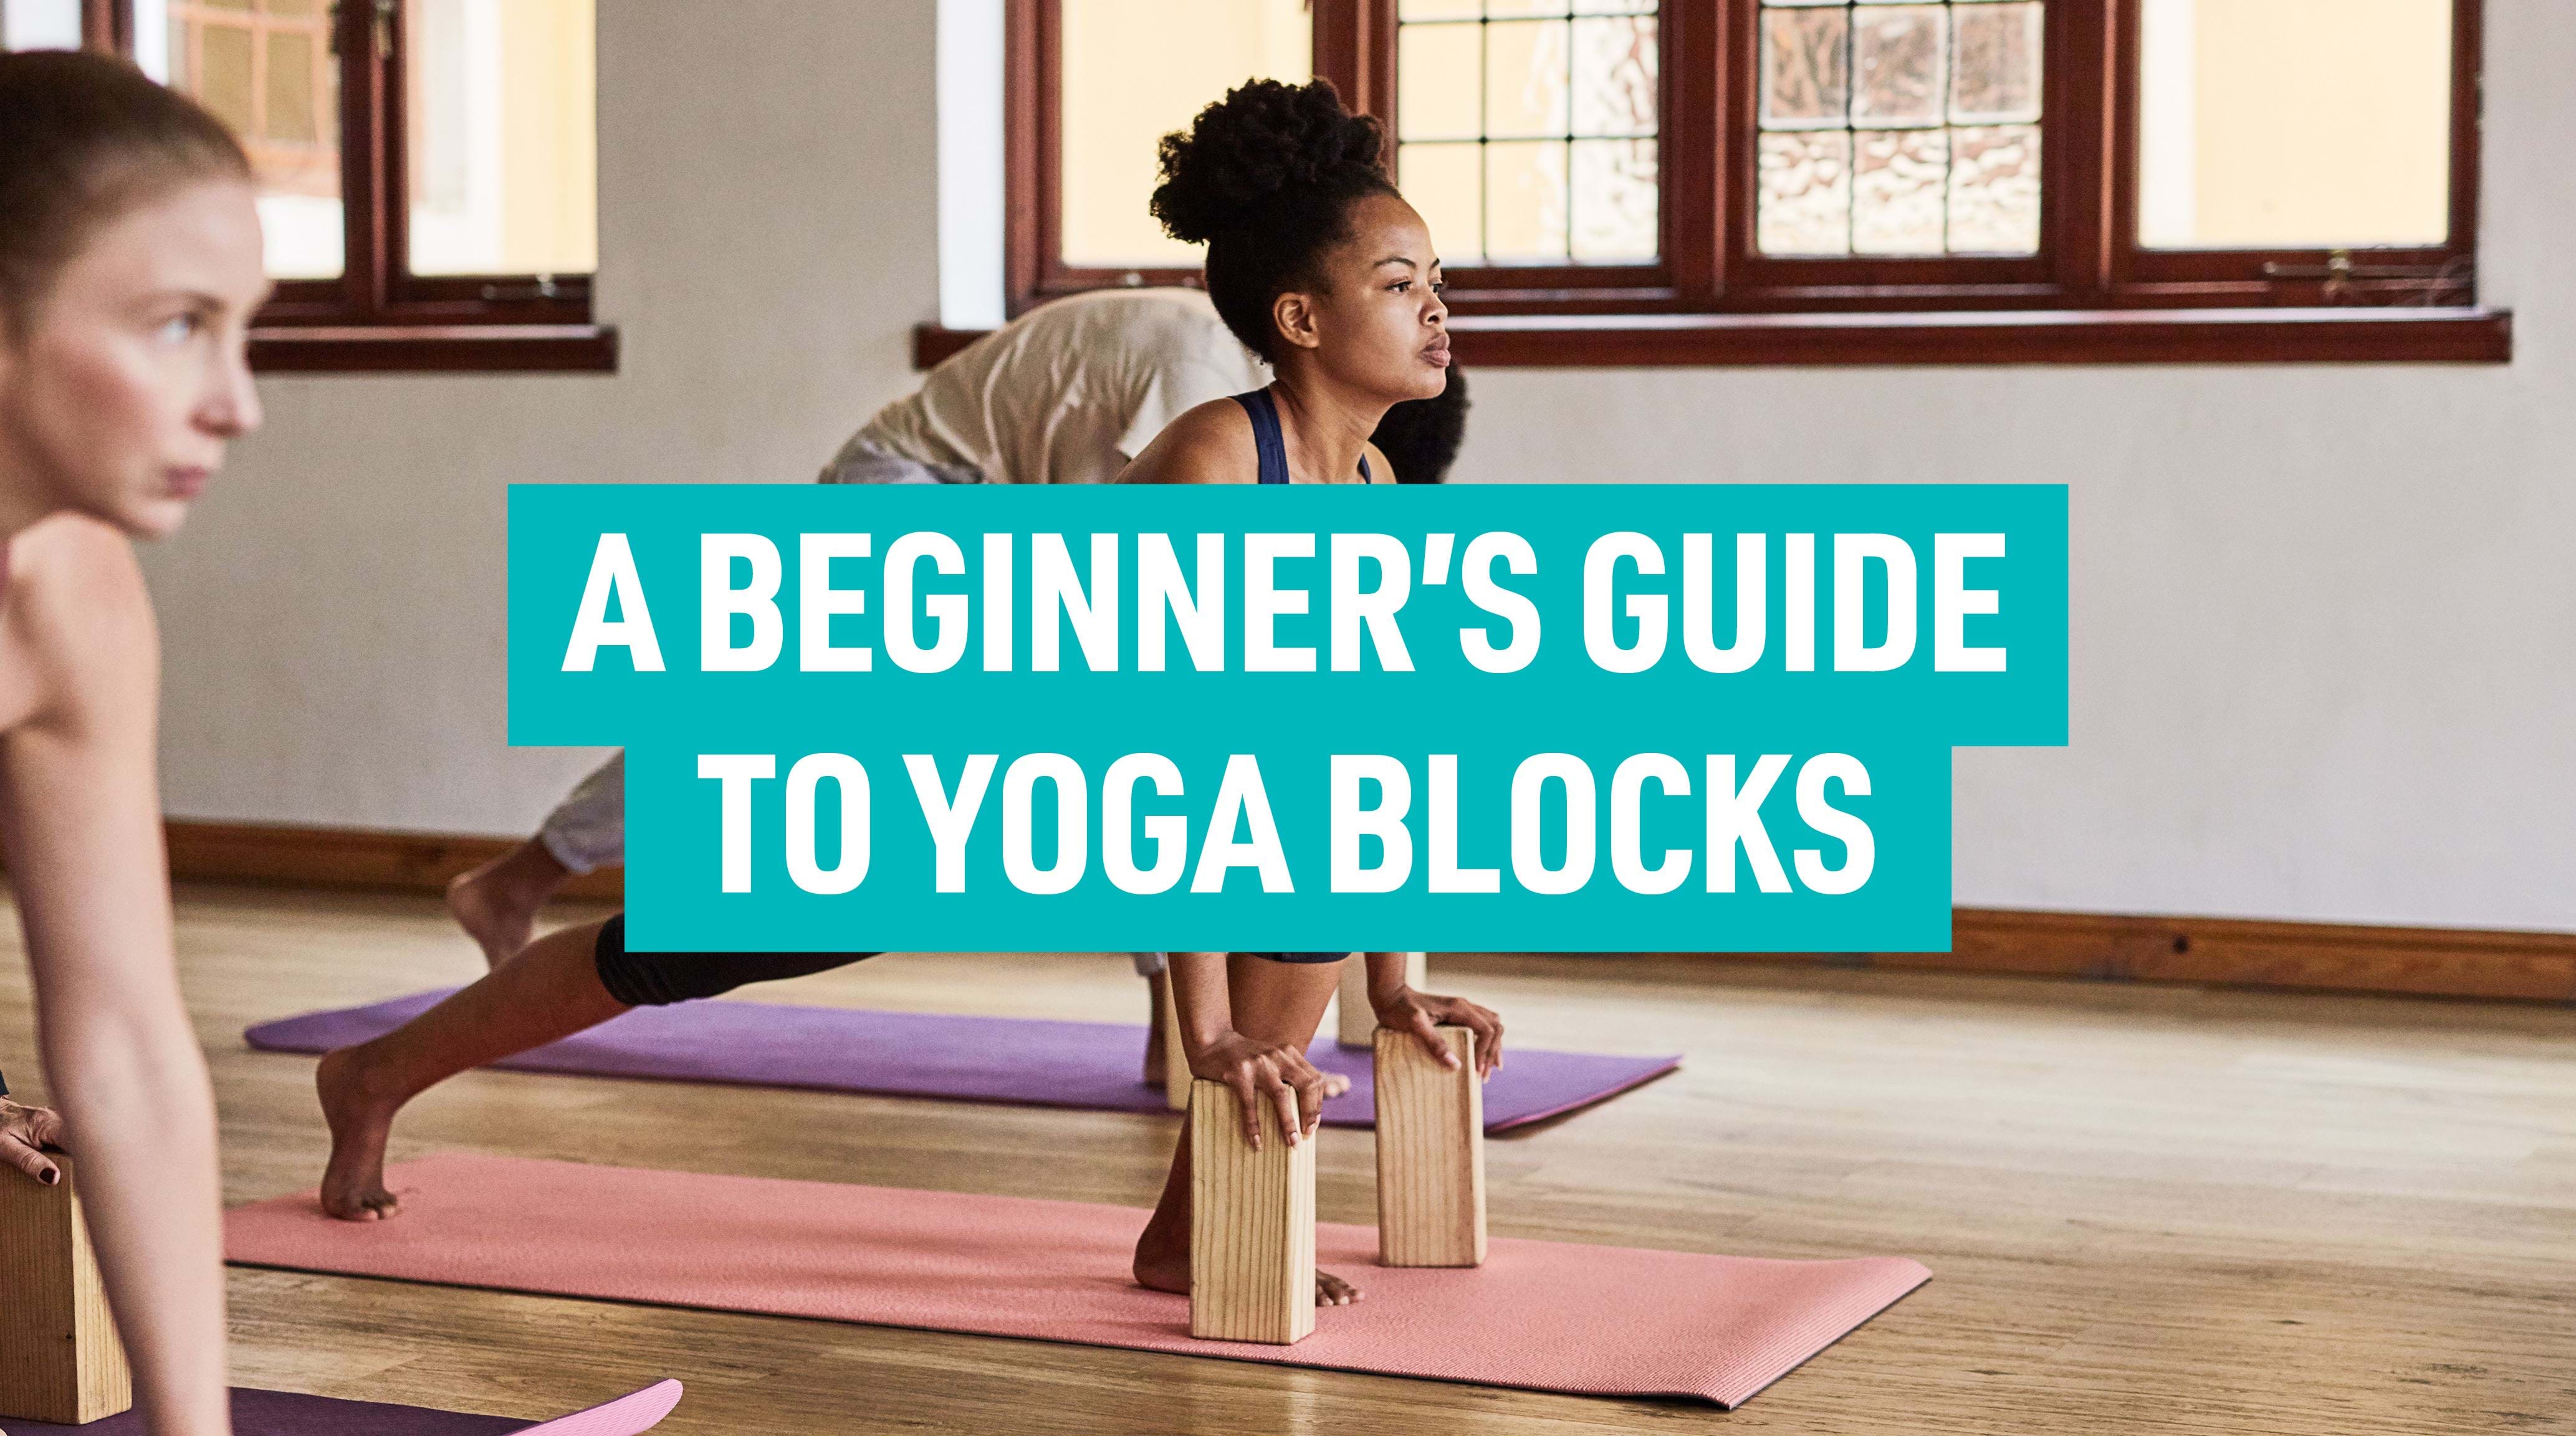 A beginner's guide to yoga